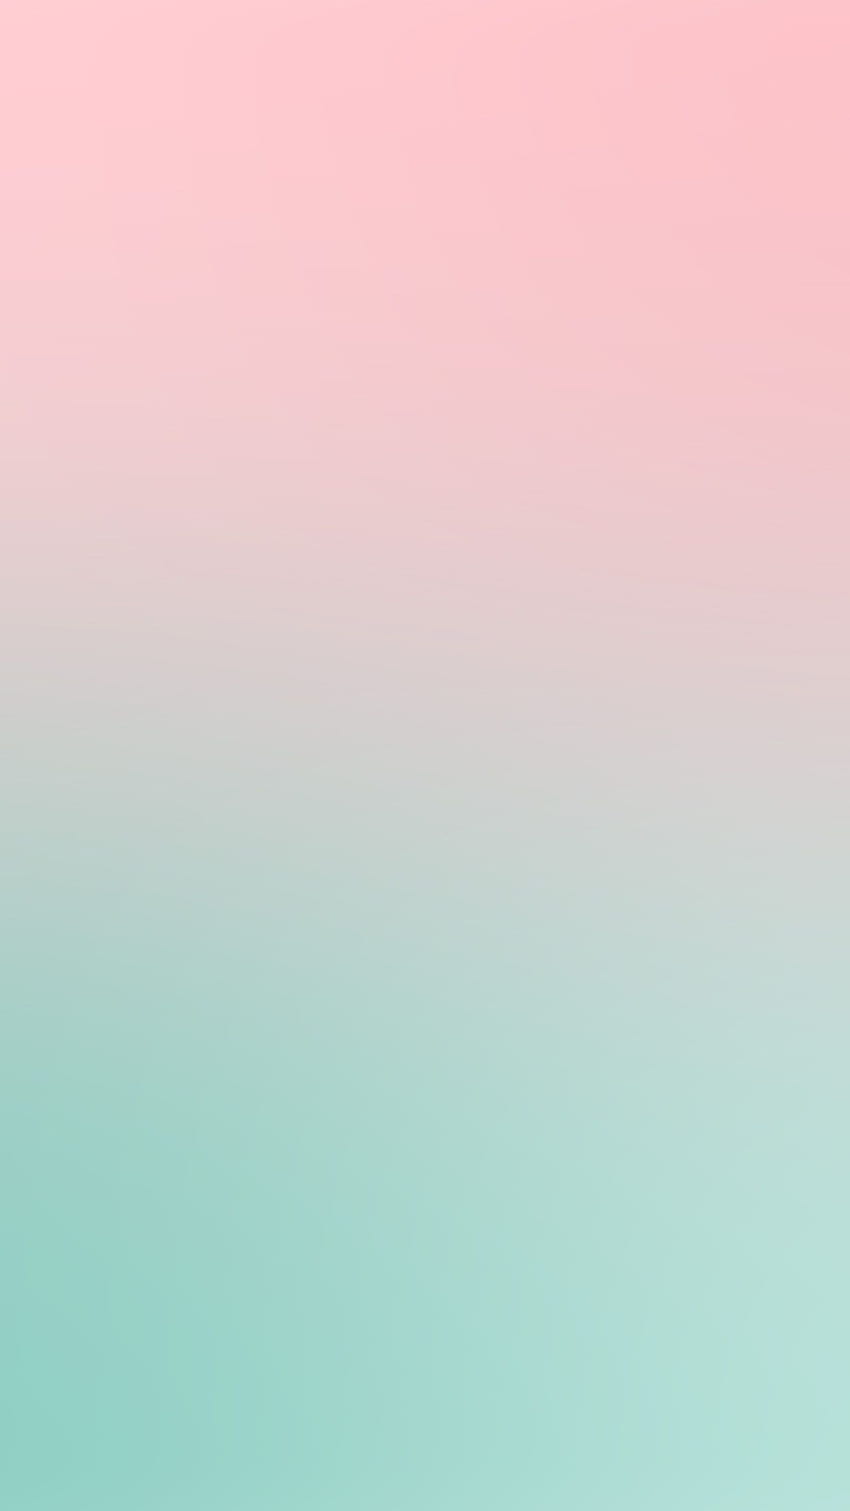 Teal And Pink Wallpaper